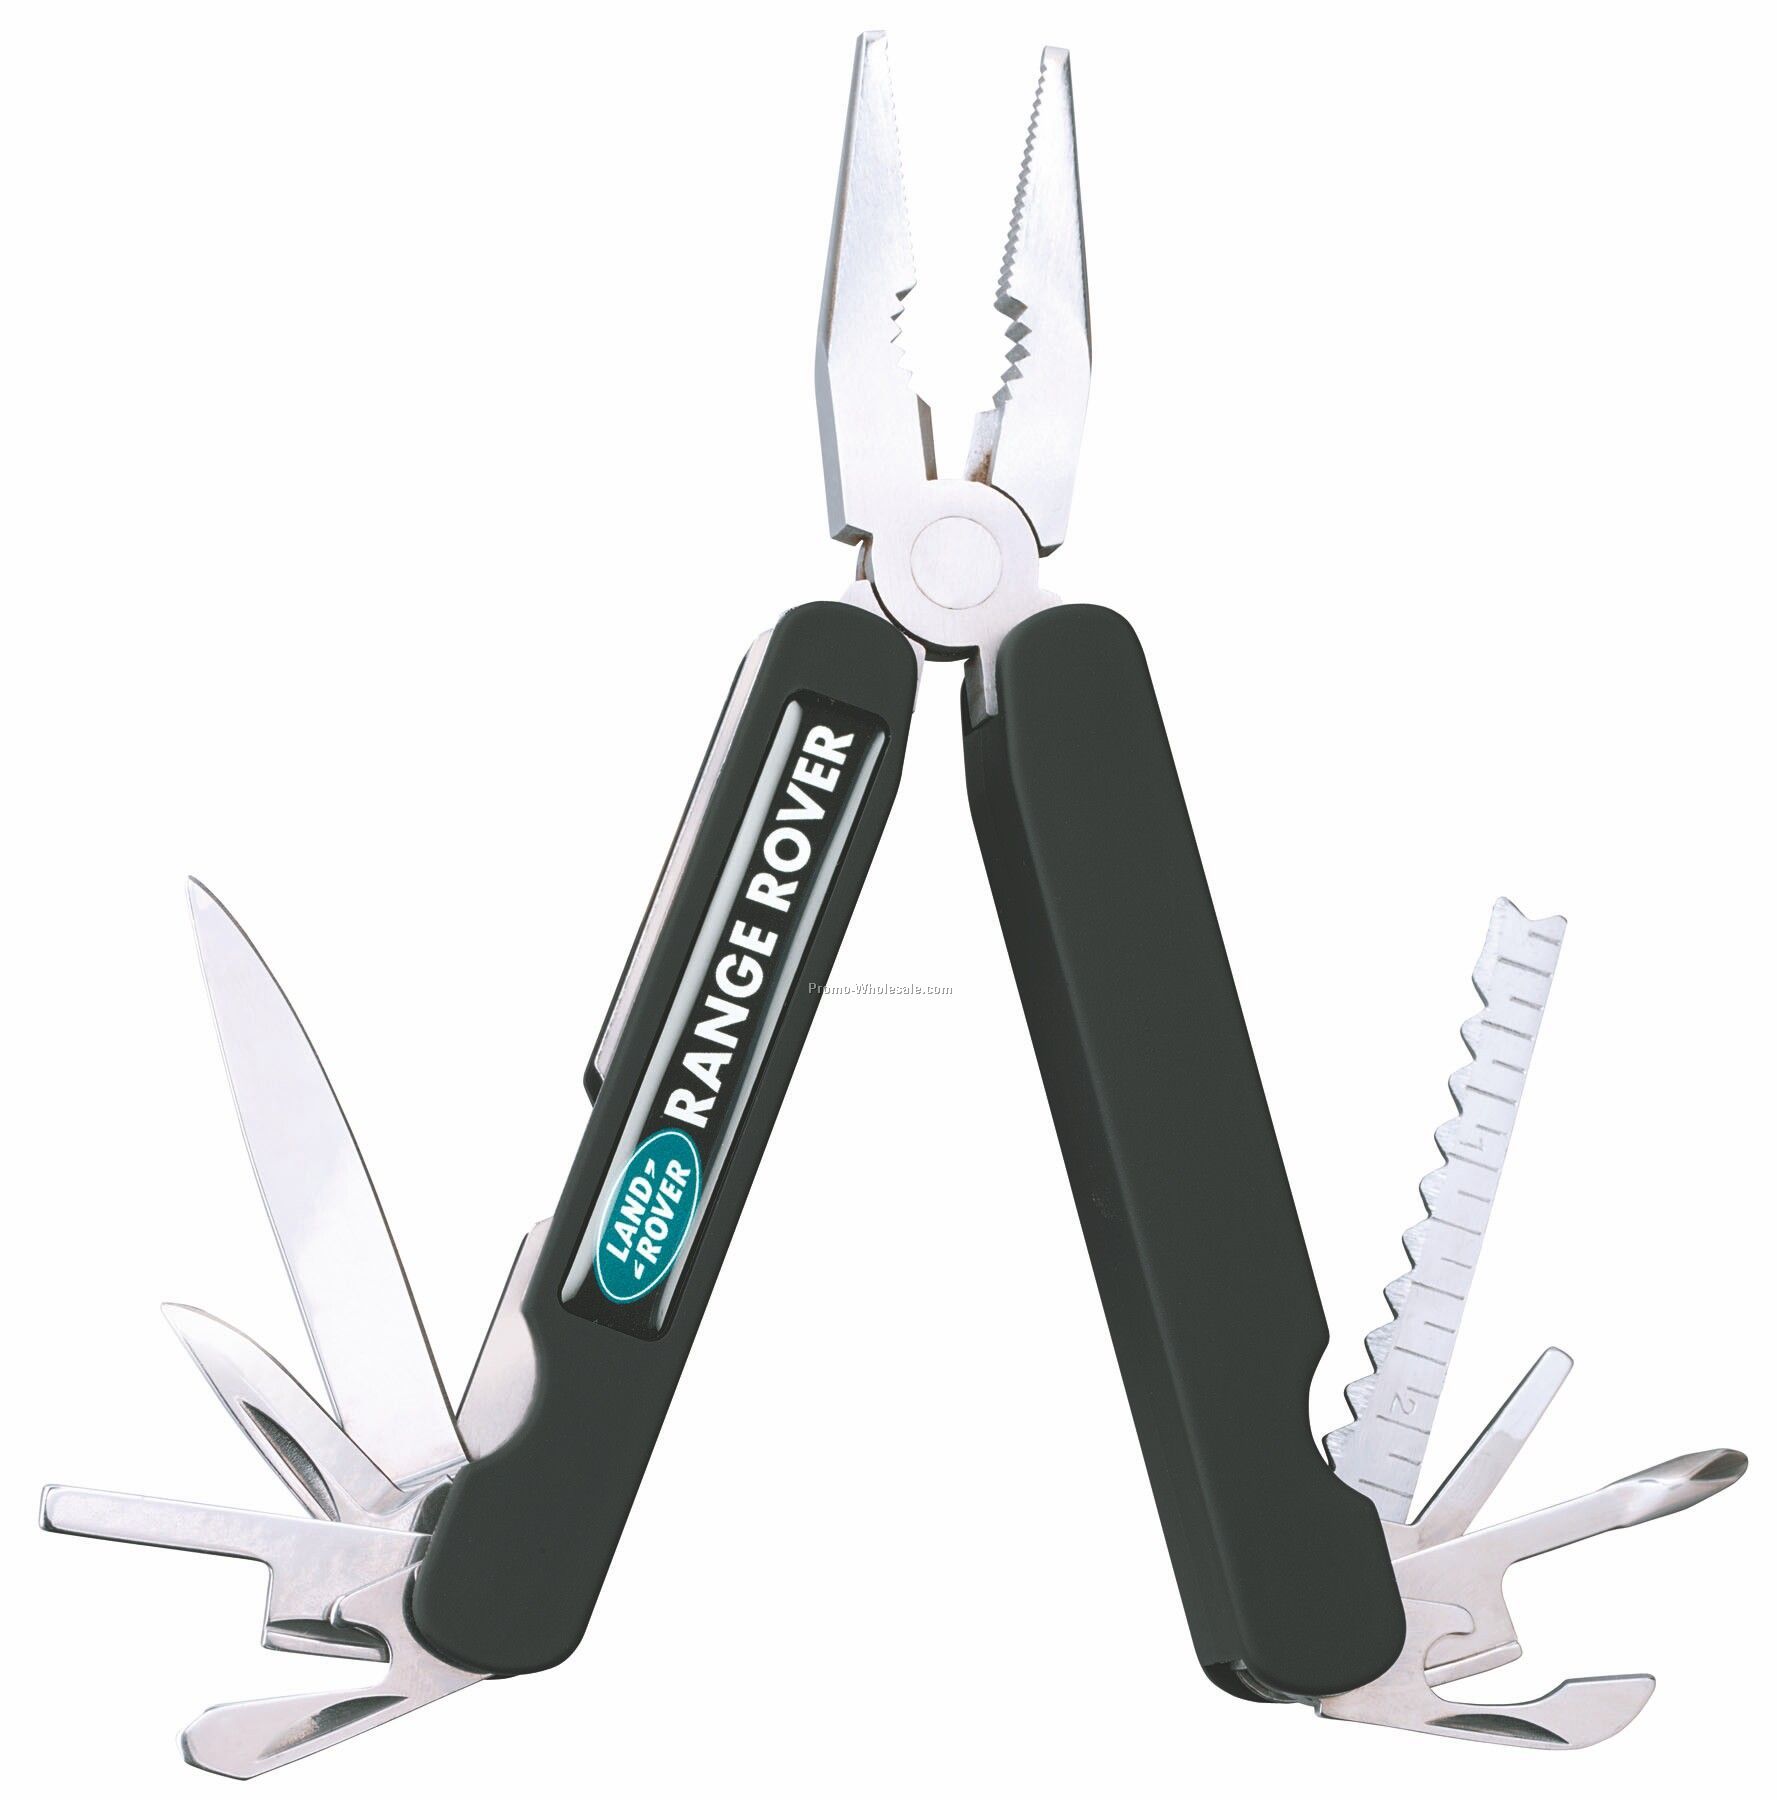 Expedition Multi-tool With Screwdriver / Opener / Knife / Ruler